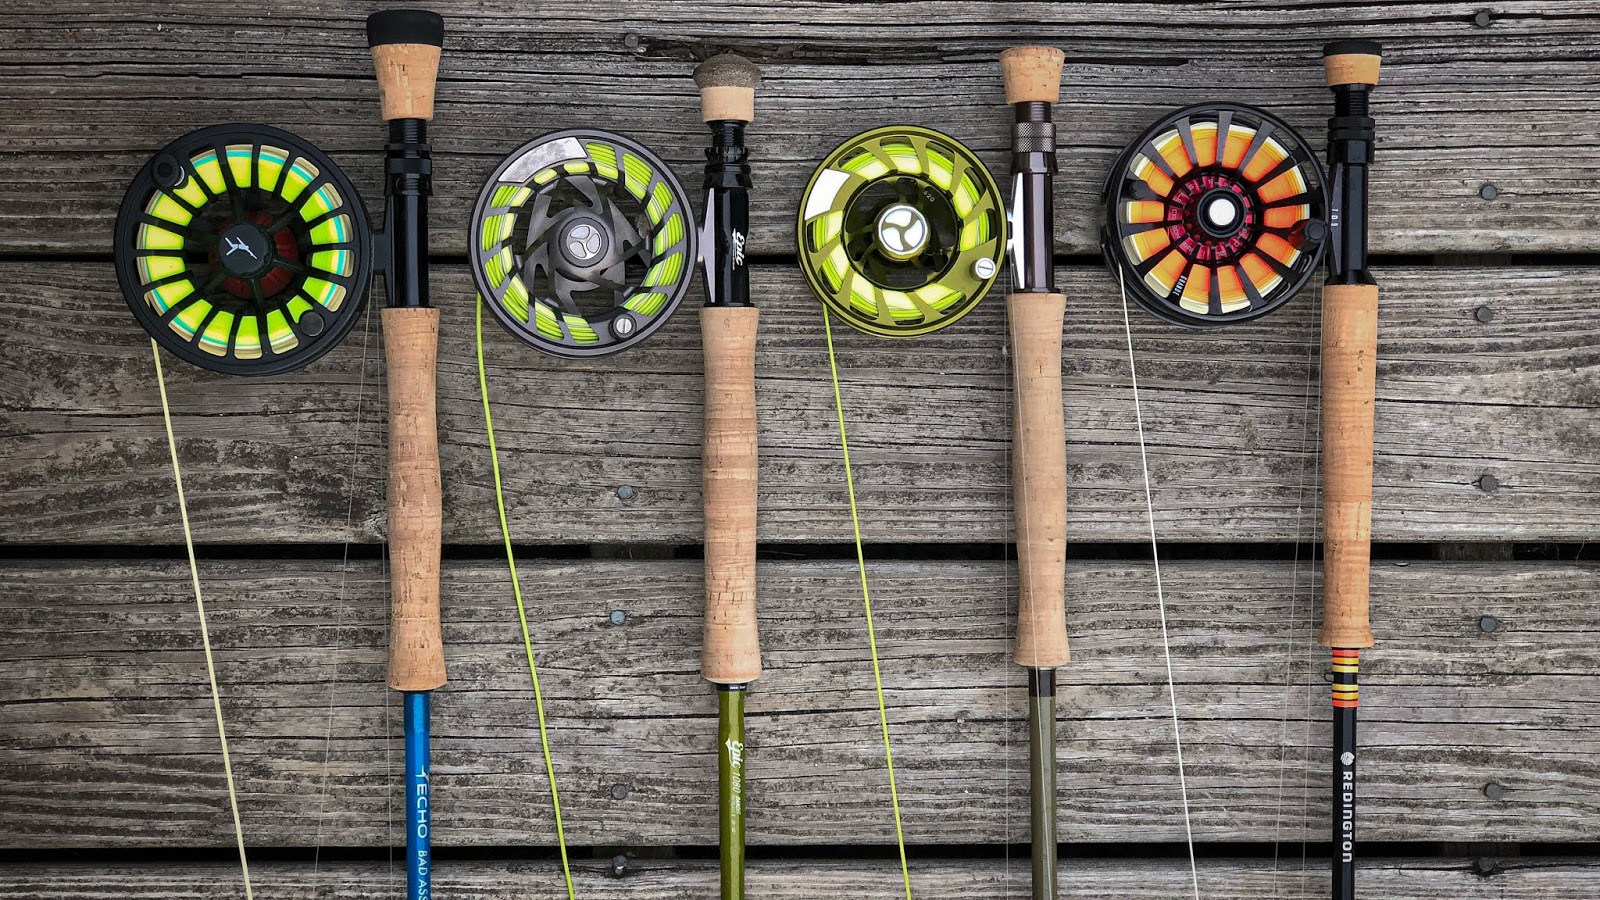 The Fiberglass Manifesto: The Sticks (Fly Reels & Fly Lines) of Summer